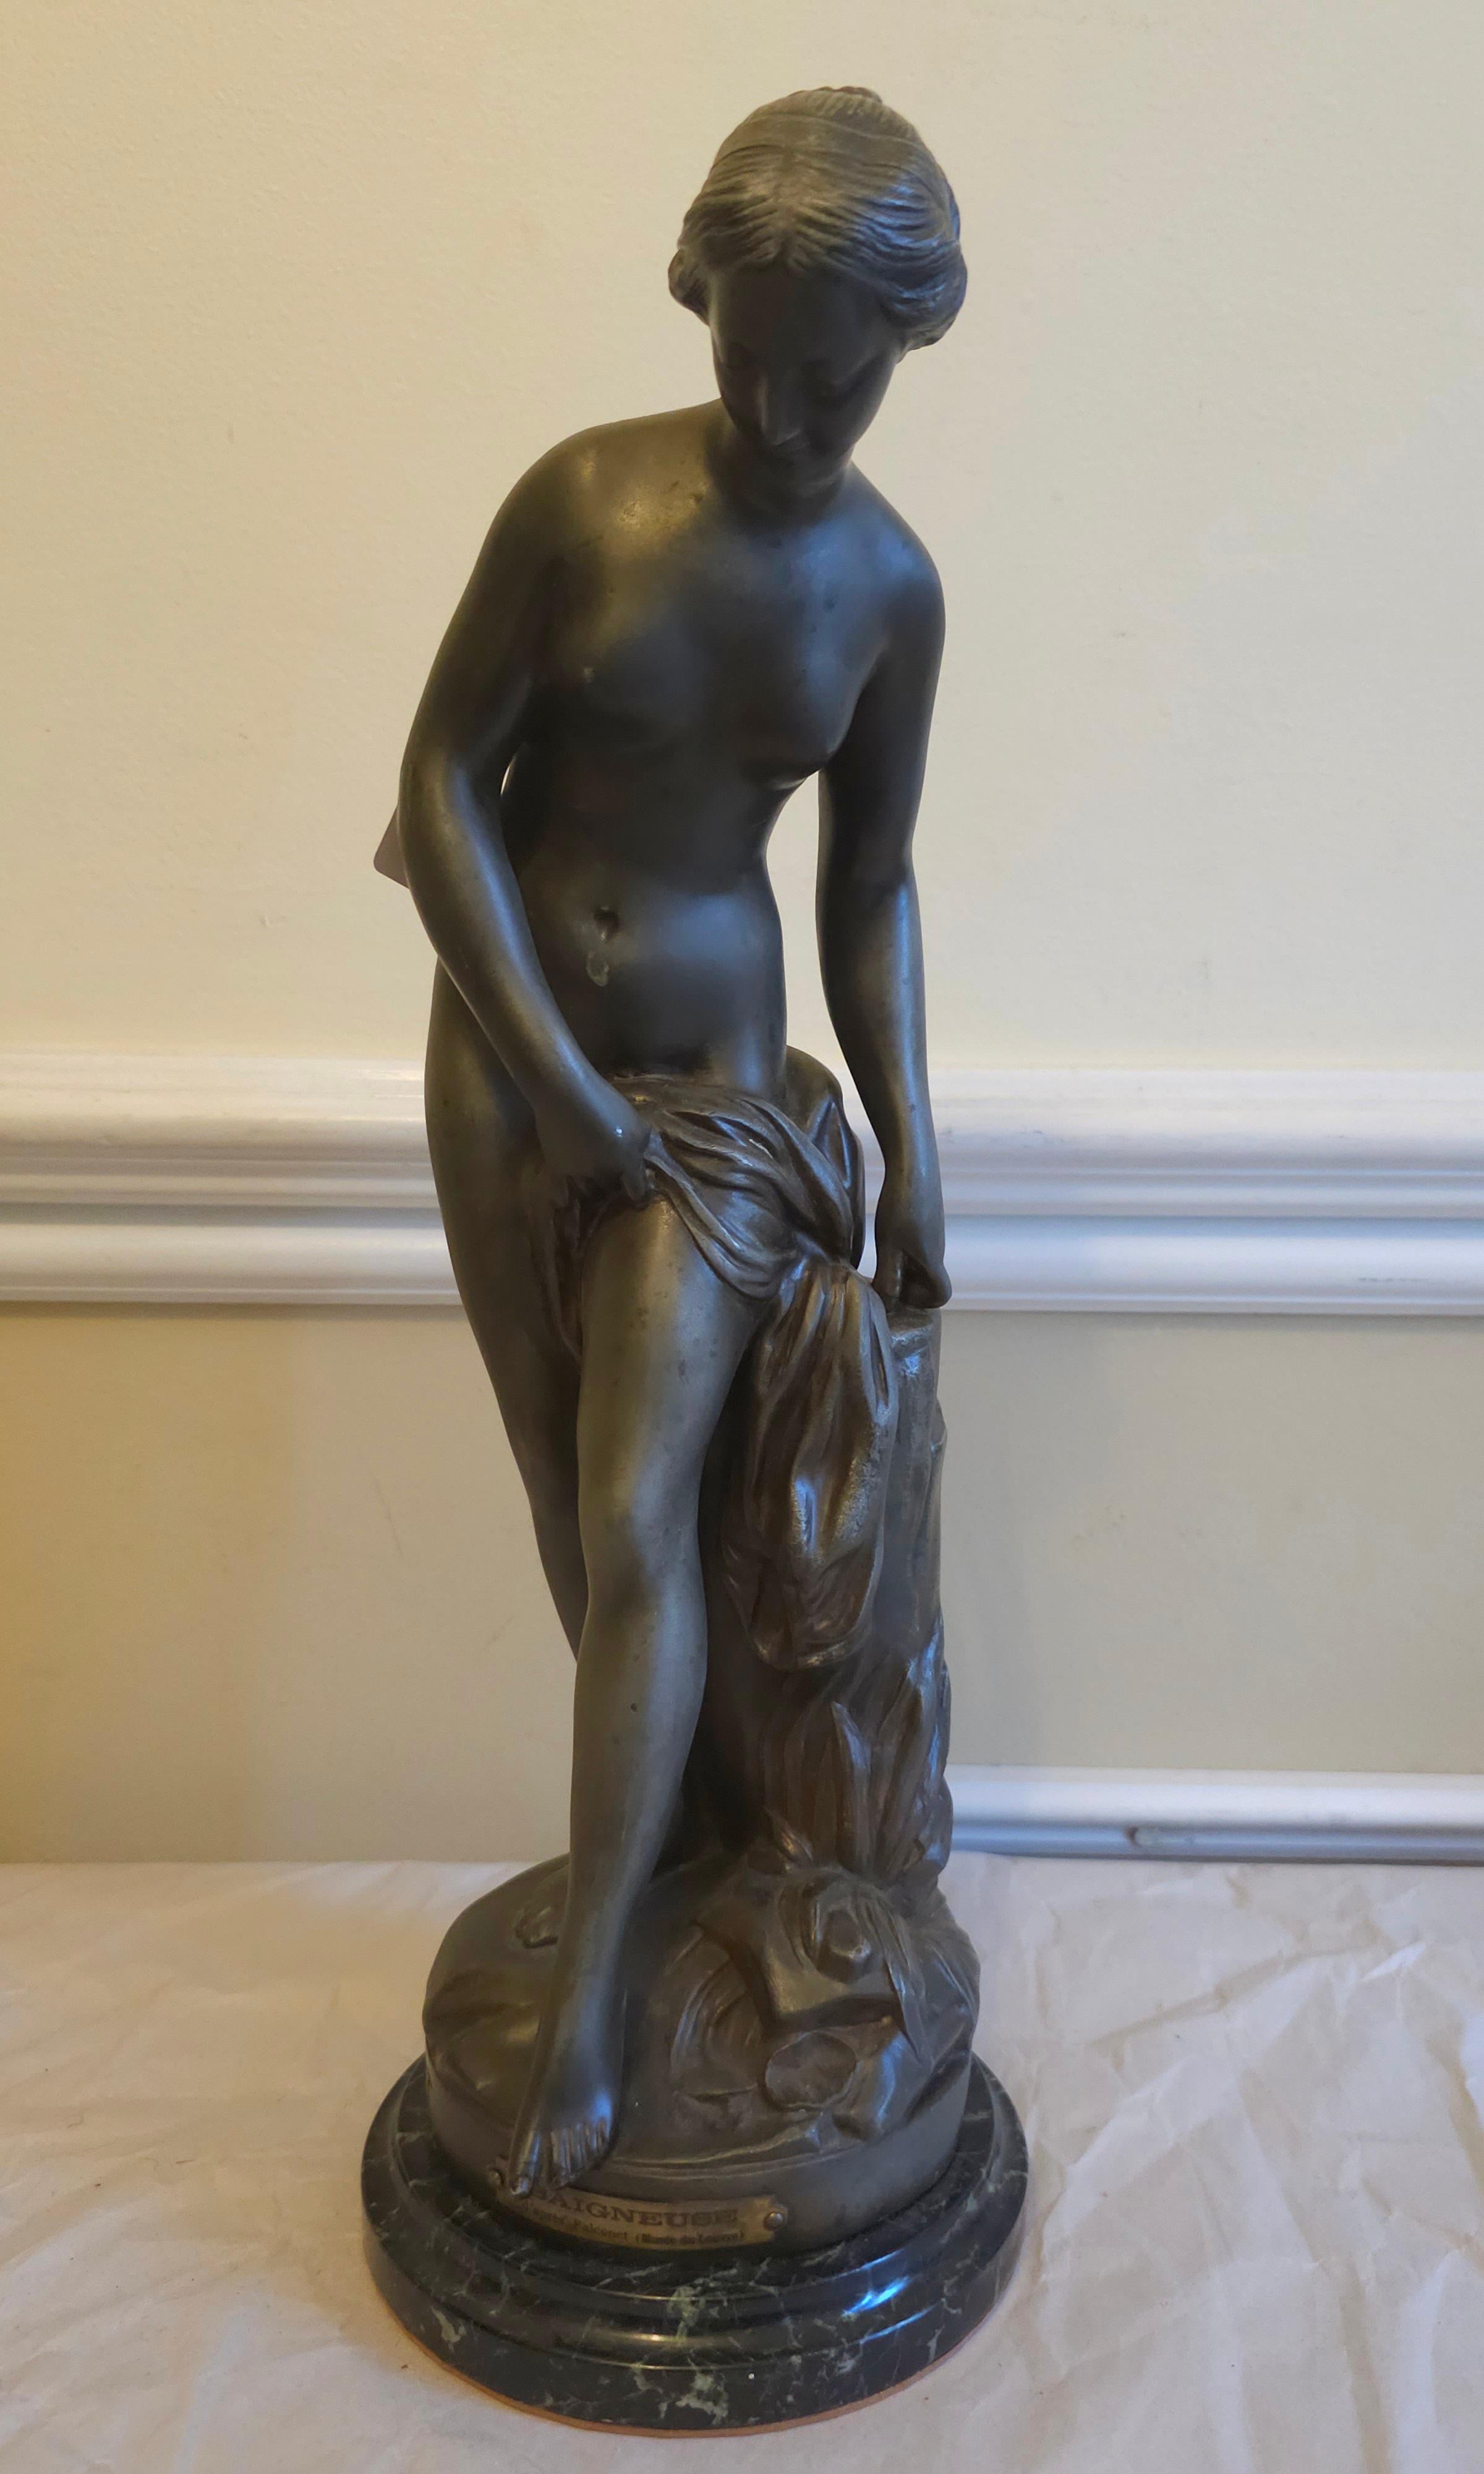 French Etienne Falconet  1716-1796 La Baigneuse (The Bather) Diana at Well Sculpture   For Sale